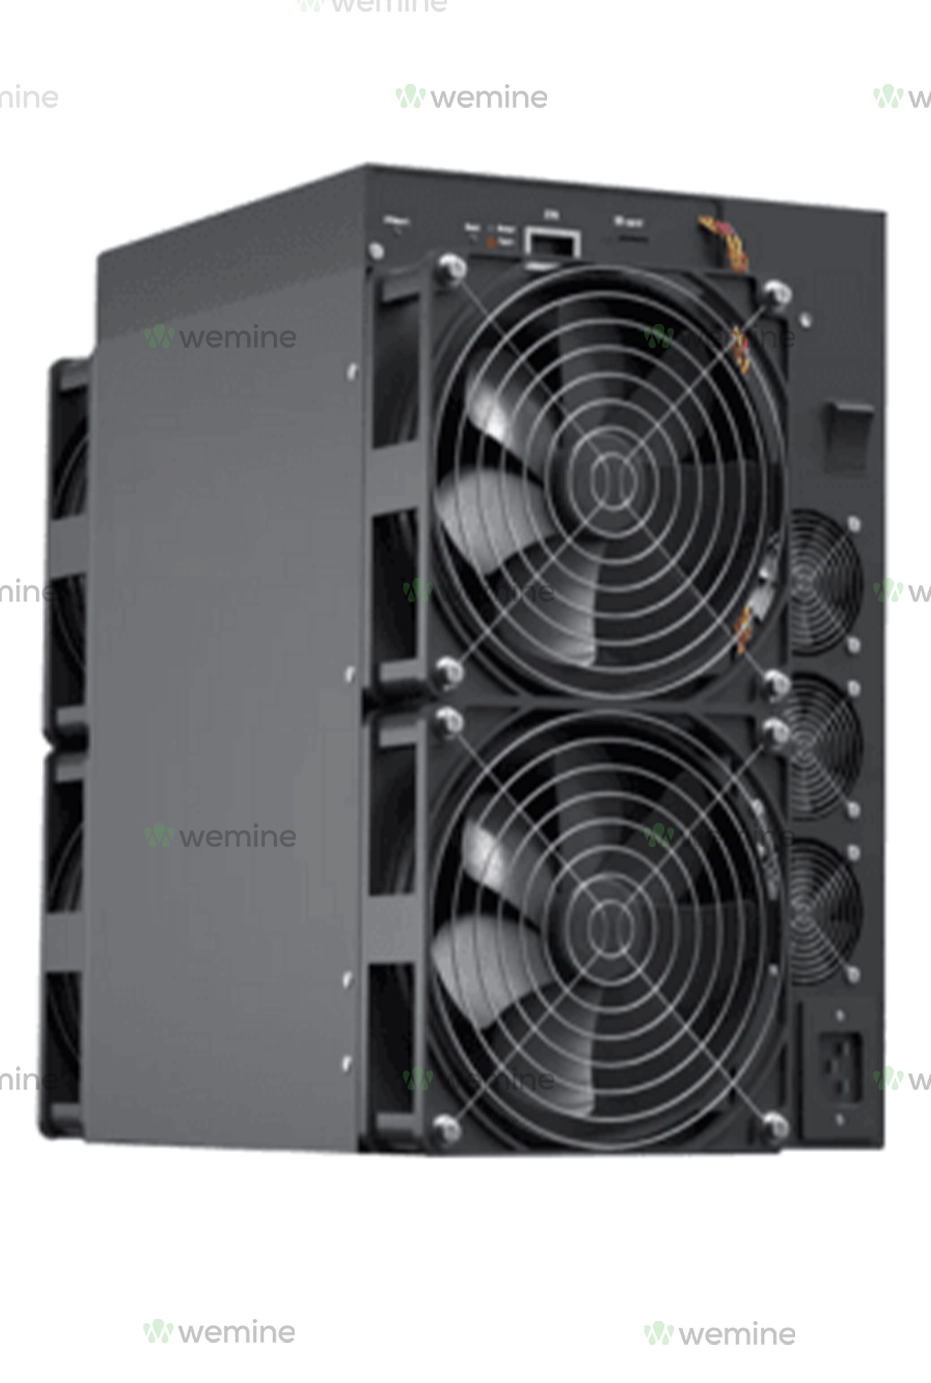 Anexminer ET5 1200MH EtHashETC Miner featuring a black metal casing with dual large cooling fans on the front, designed for efficient heat dissipation during the mining process. The unit is intended for mining cryptocurrencies using the EtHash algorithm, suitable for coins like Ethereum Classic (ETC)